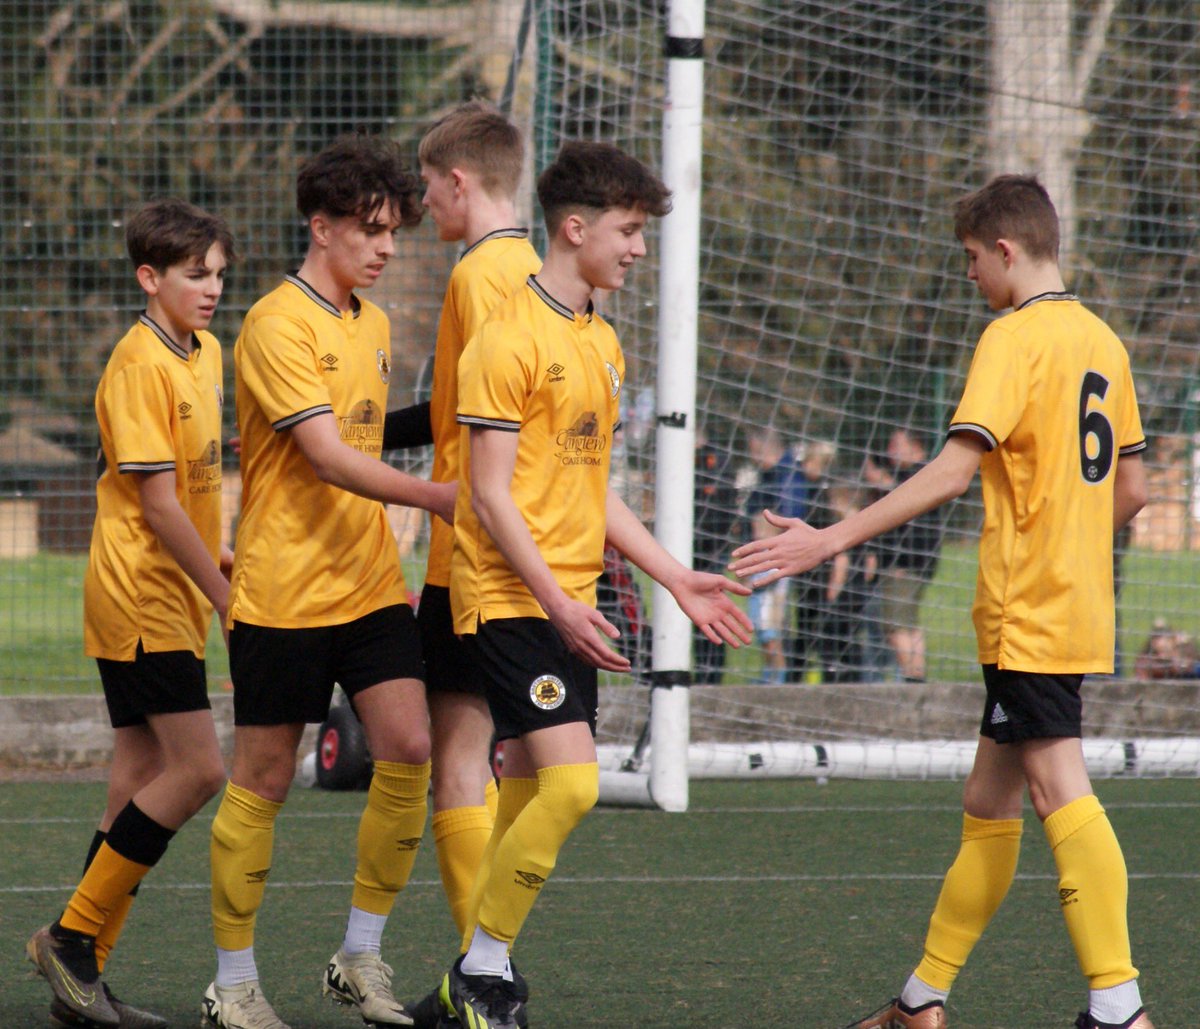 OPEN TRIALS - U13 TO U16 TEAMS We’re holding open trials for our boys academy player pathway for the 2024/2025 season. These open trials are for players who are currently playing at U12-U15s and who live within a communitable distance of Boston. Sign up: bostonunited.coordinate.cloud/project/43091